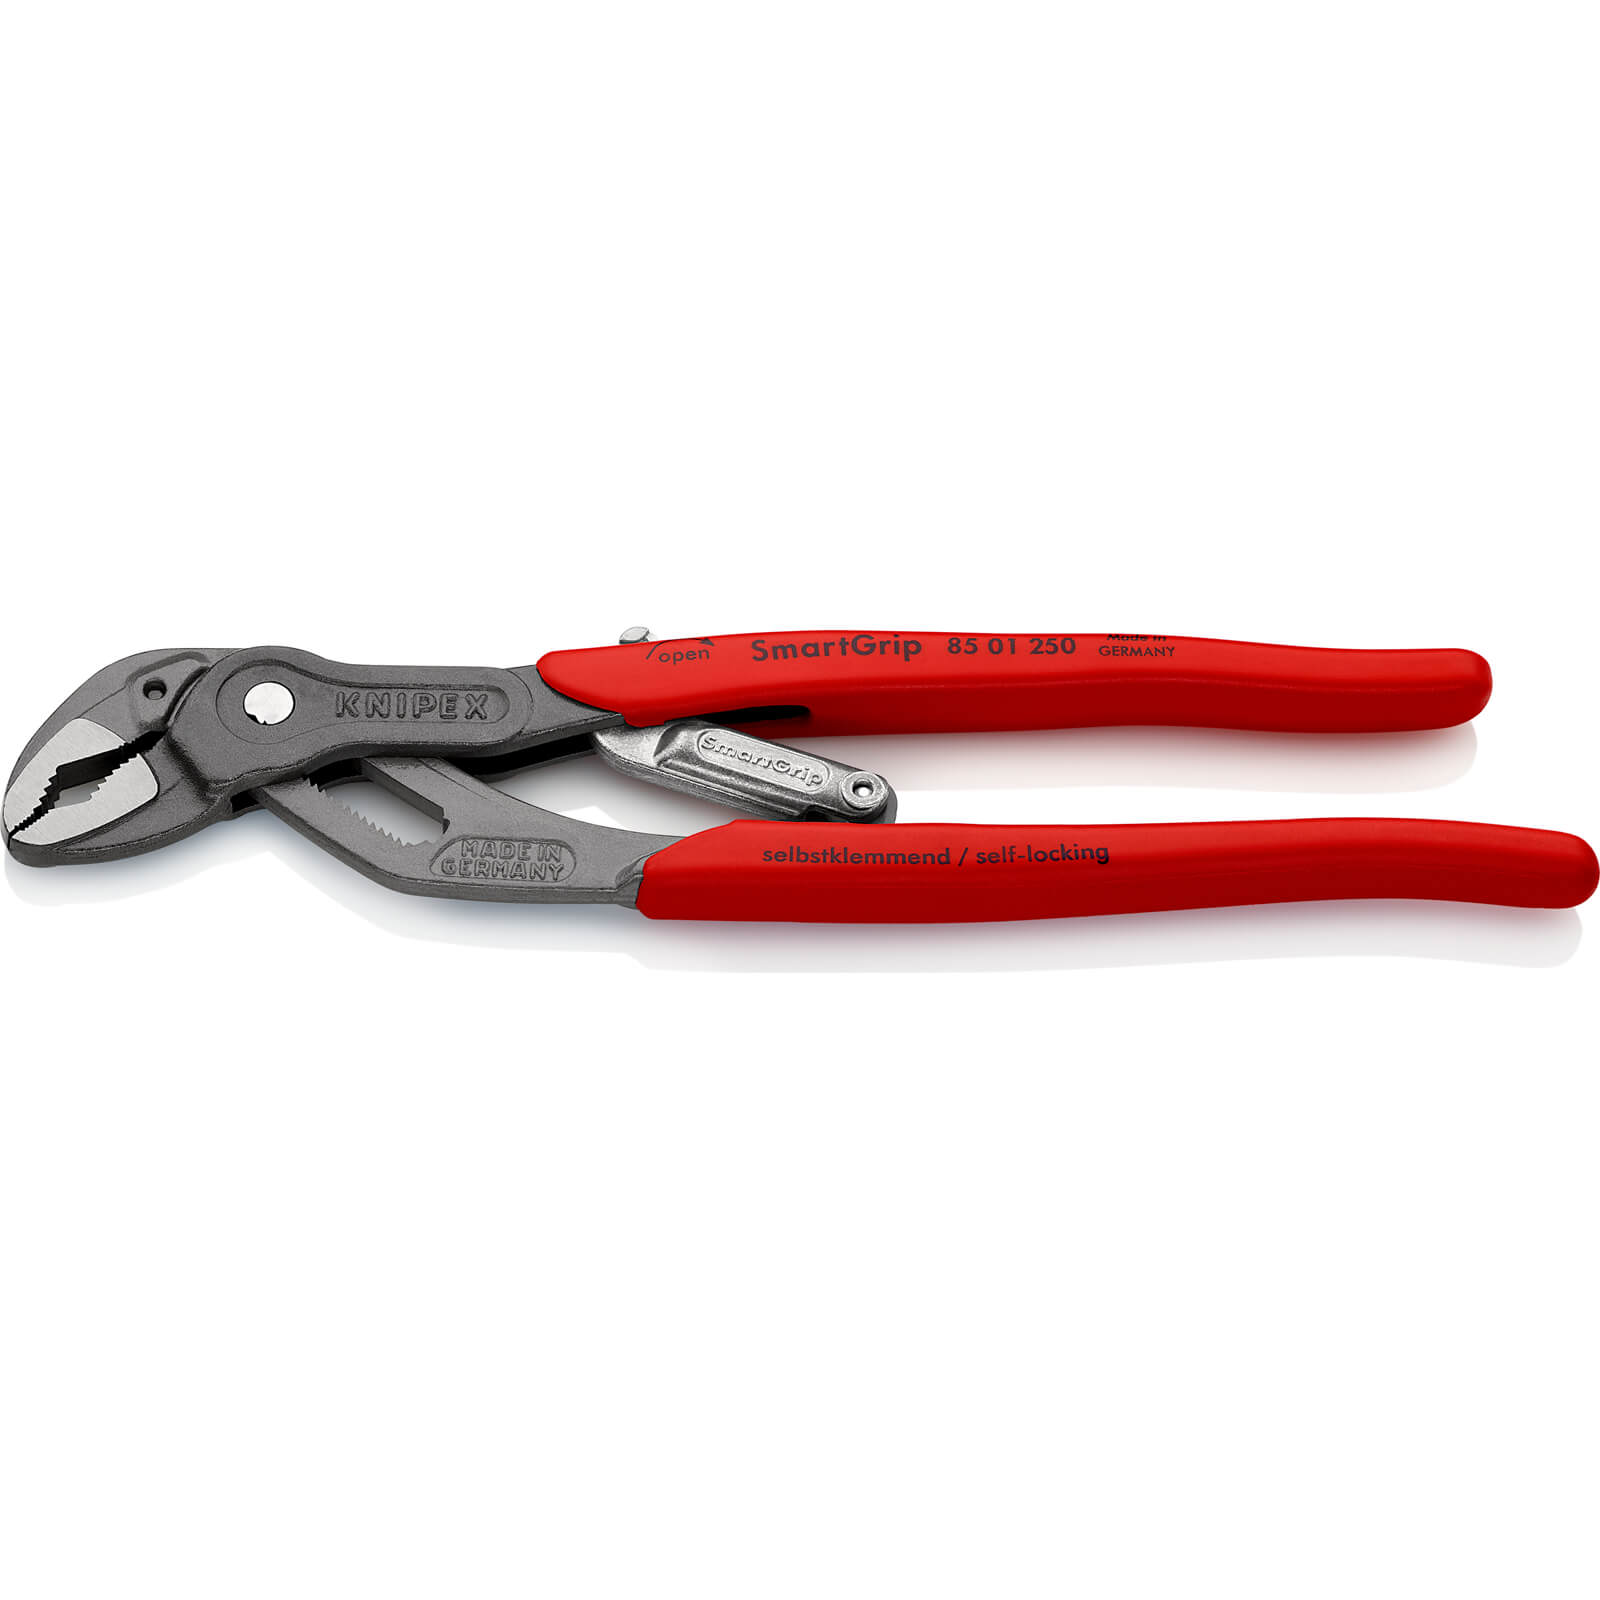 Image of Knipex 85 01 Smart Grip Water Pump Pliers 250mm